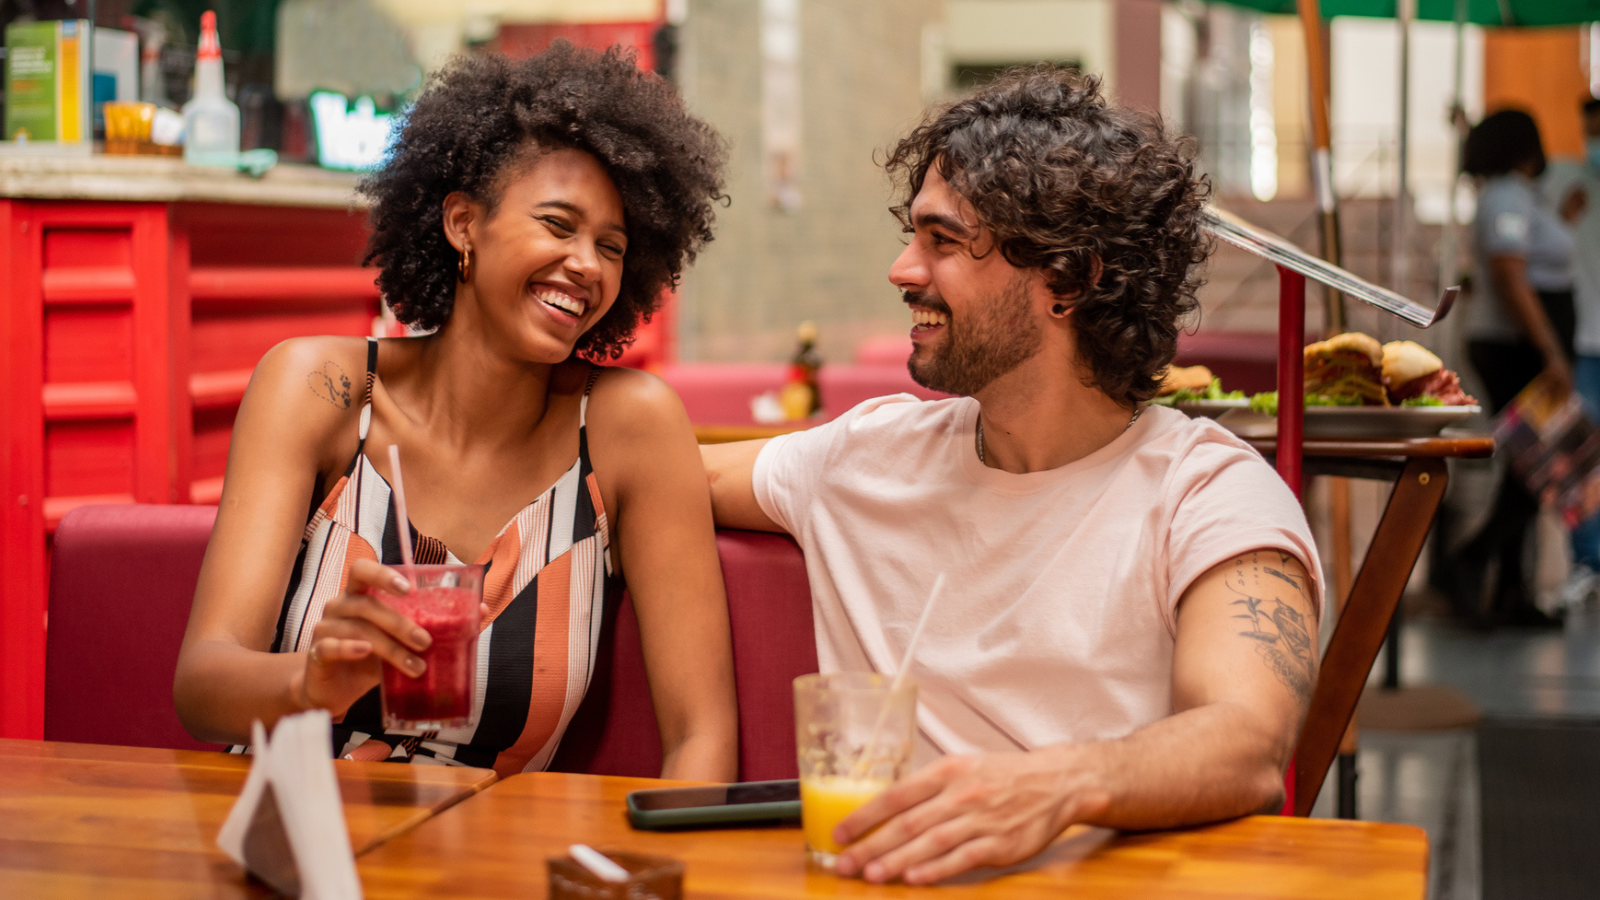 3 surefire dating sites that'll help you find your person